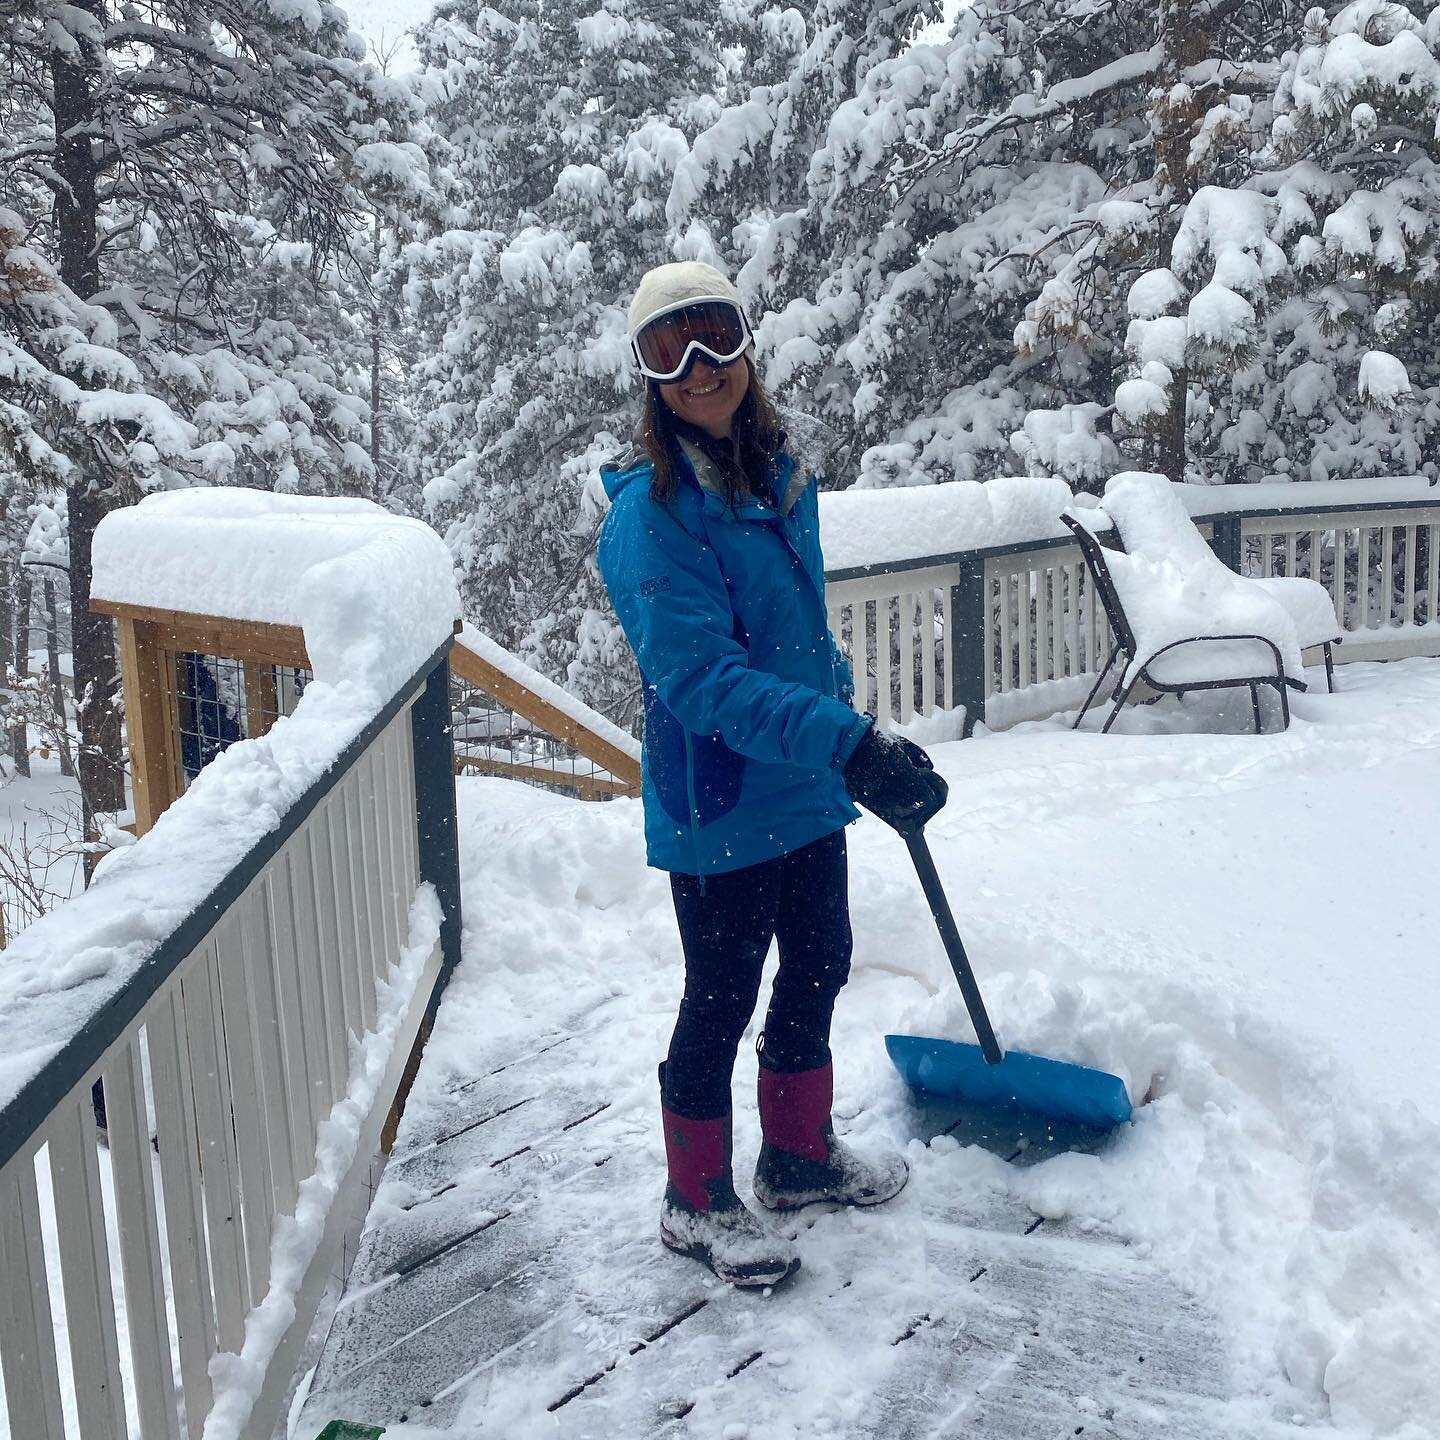 Sometimes shoveling calls for ski goggles! This is the first of three times shoveling today 🤷🏻&zwj;♀️
.
.
.
.

#exploreyourlife #optoutside #smithgoggles #outdooradventures #outdoorresearch #coloradolife #snowstorm2021 #mountainlife #naturelover #c